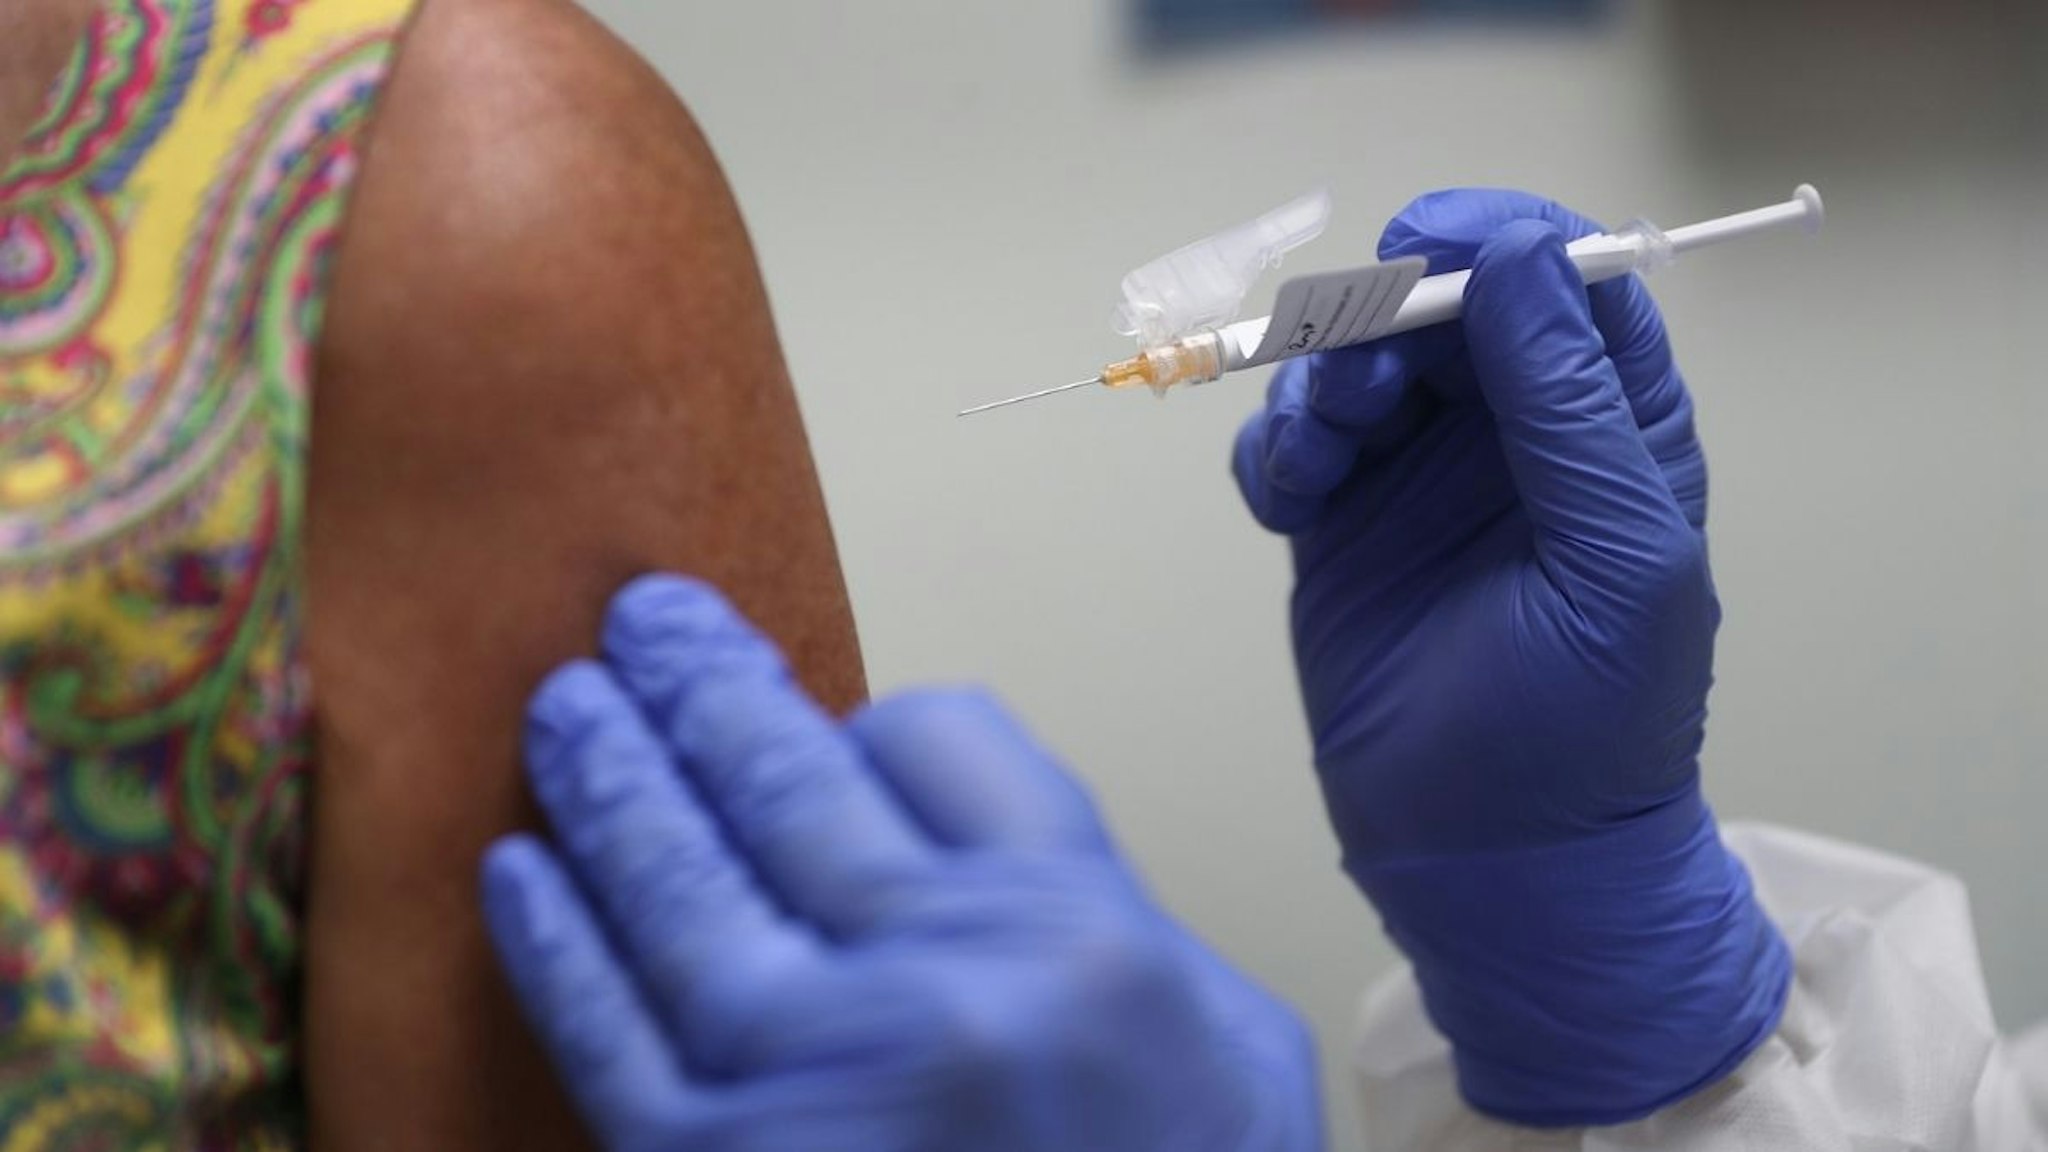 Lisa Taylor receives a COVID-19 vaccination from RN Jose Muniz as she takes part in a vaccine study at Research Centers of America on August 07, 2020 in Hollywood, Florida.